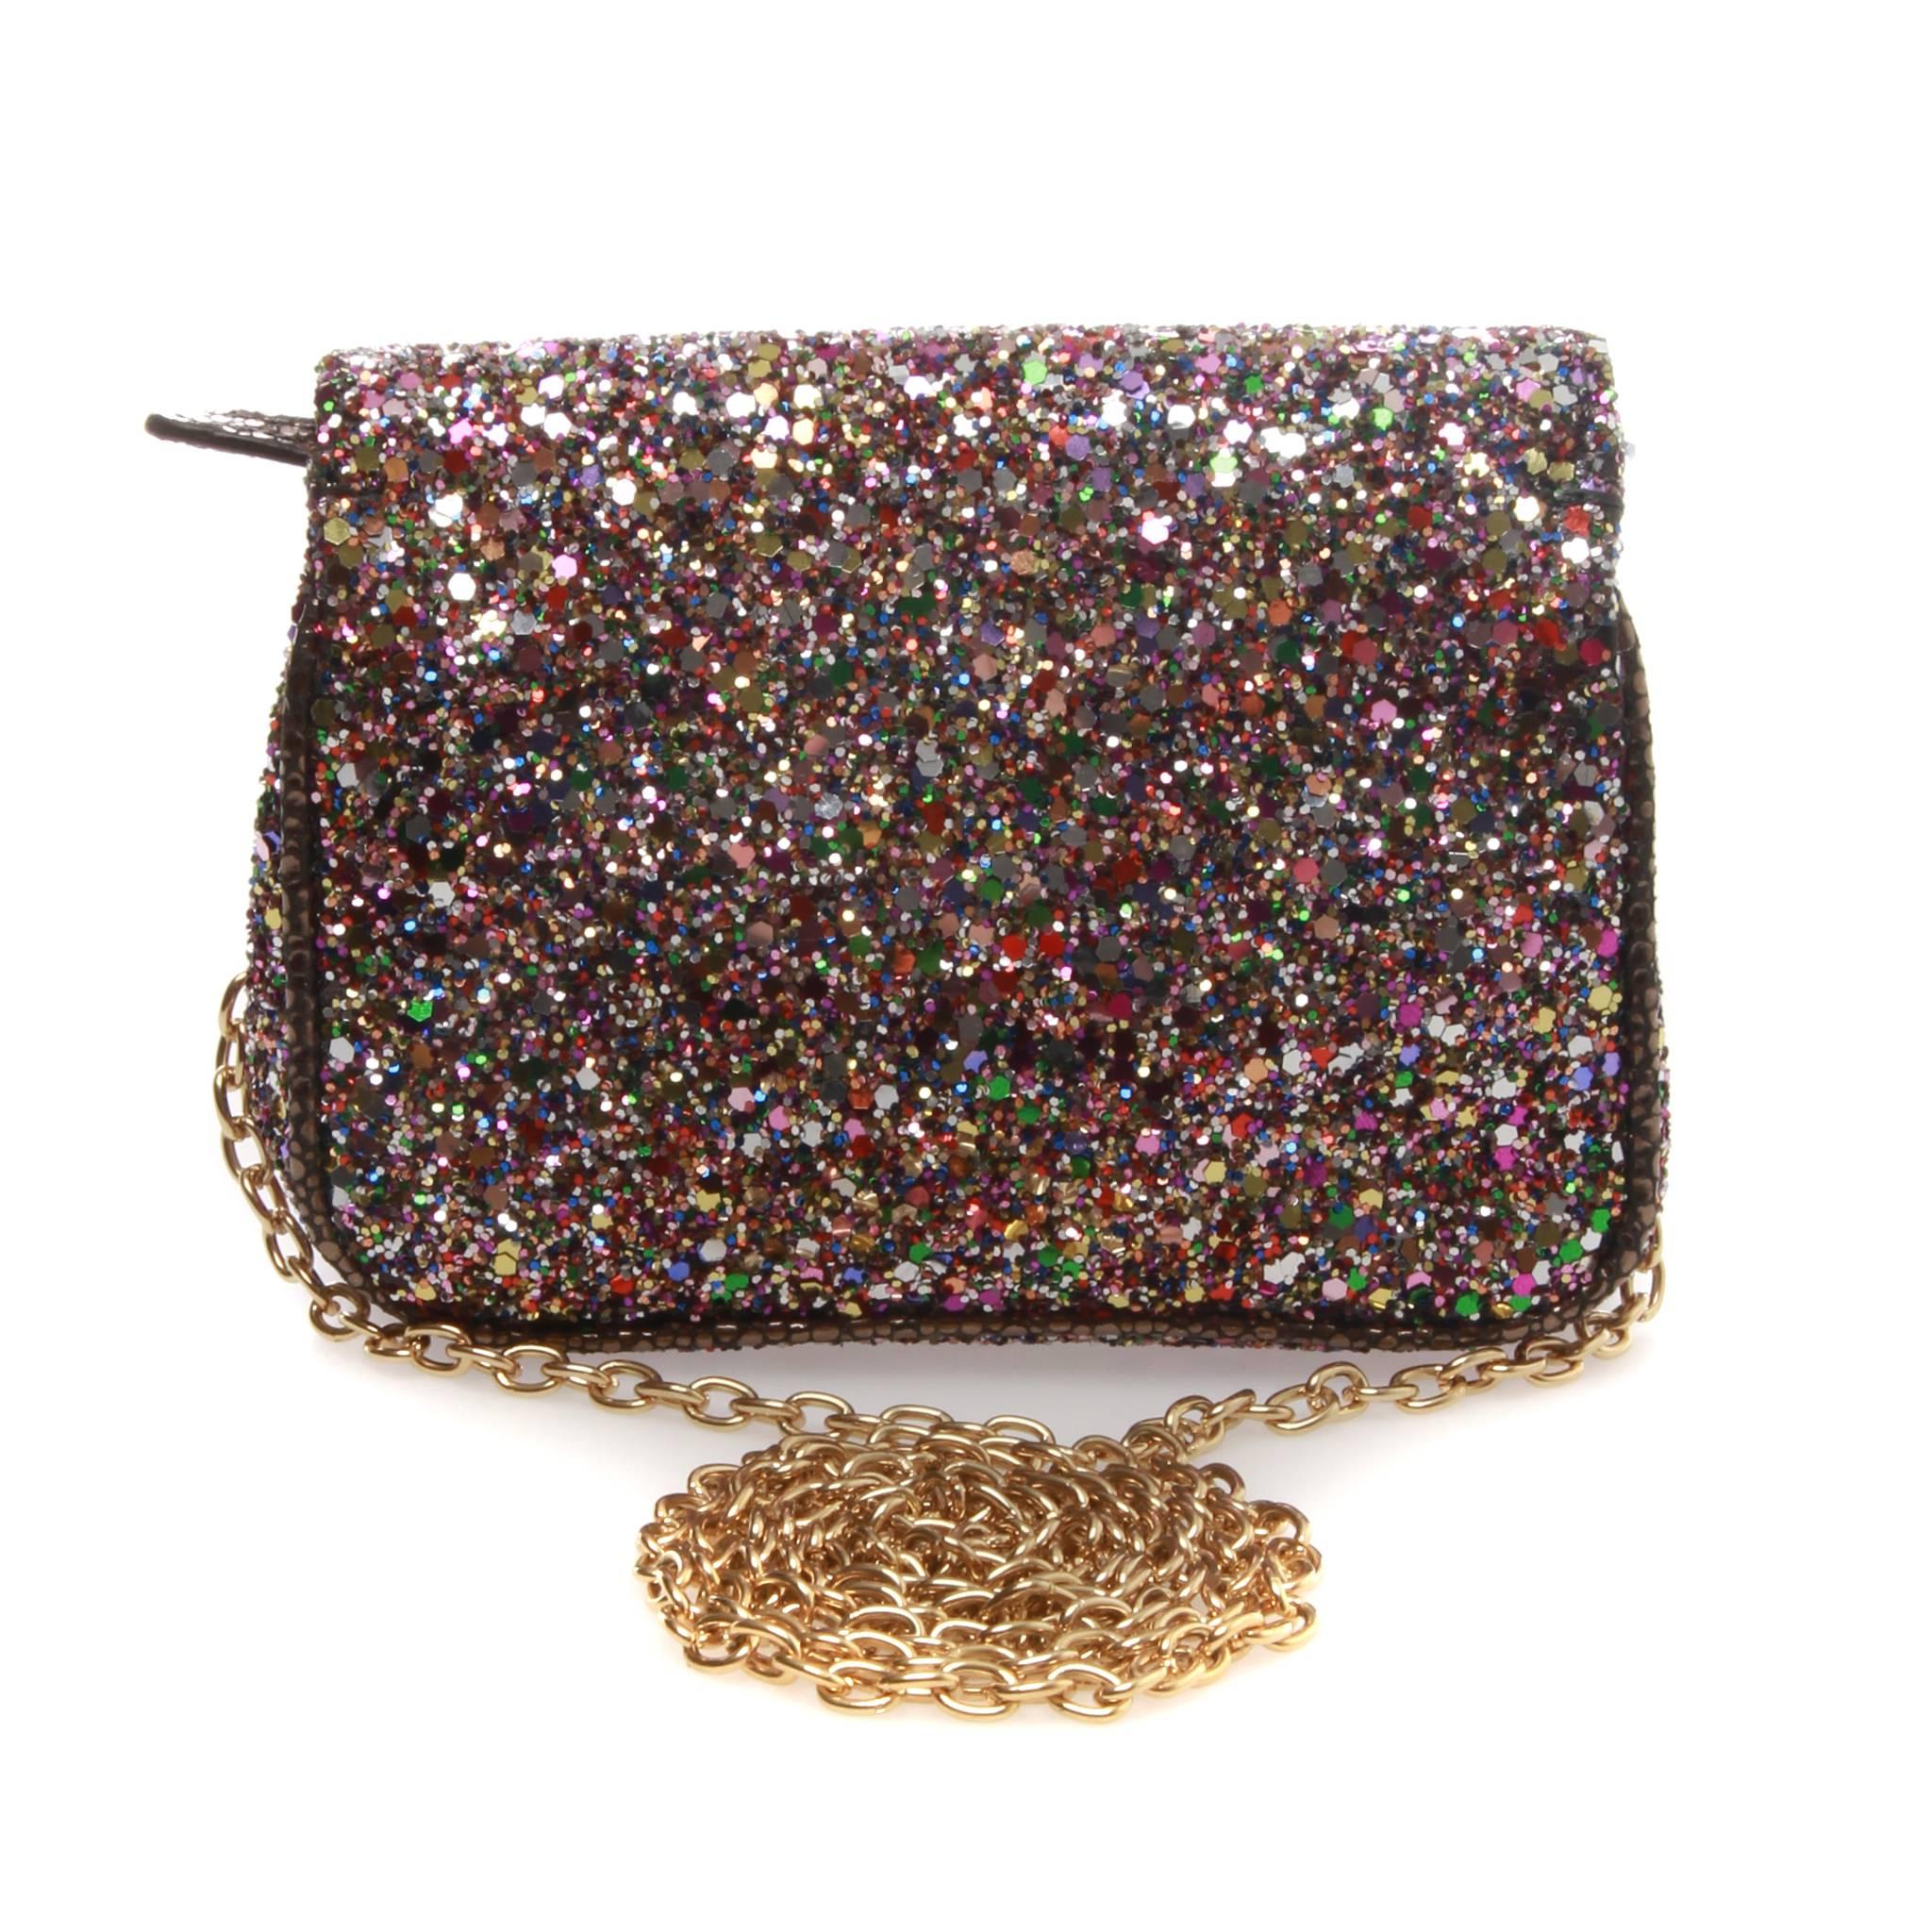 JIMMY CHOO Caro Glitter Clutch

Jimmy Choo's perfectly petite glitter clutch. 
Colourful sparkles and gold mesh detail lend an eye-catching note to cocktail dresses and evening gowns alike.
Removable chain-link shoulder strap. Gold-toned top zip,